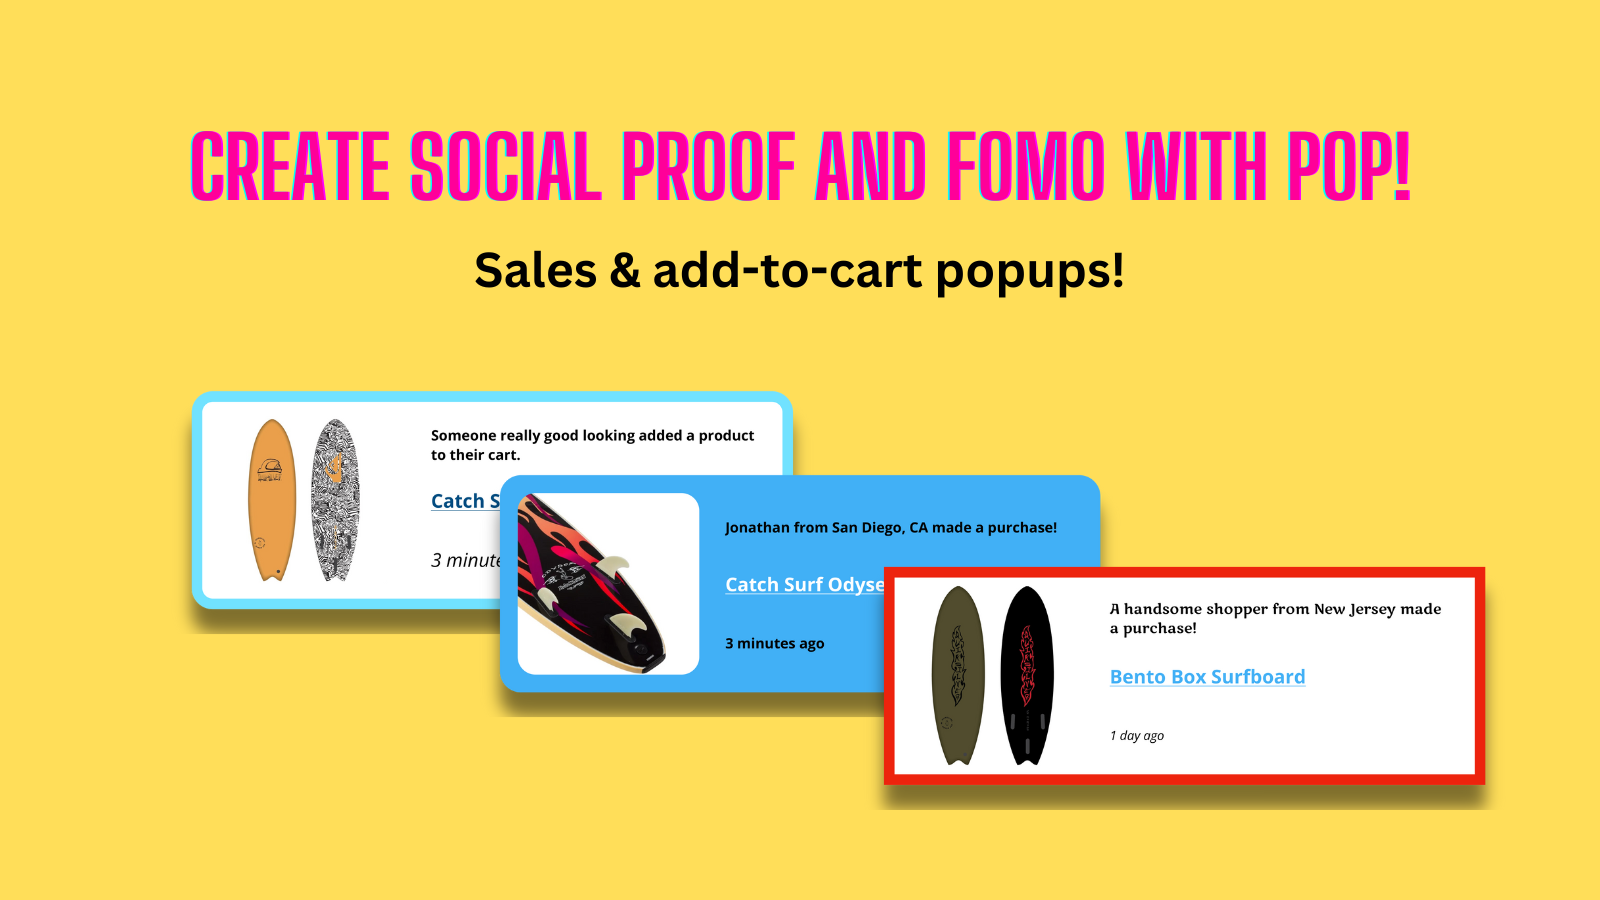 Create social proof and FOMO with Pop!